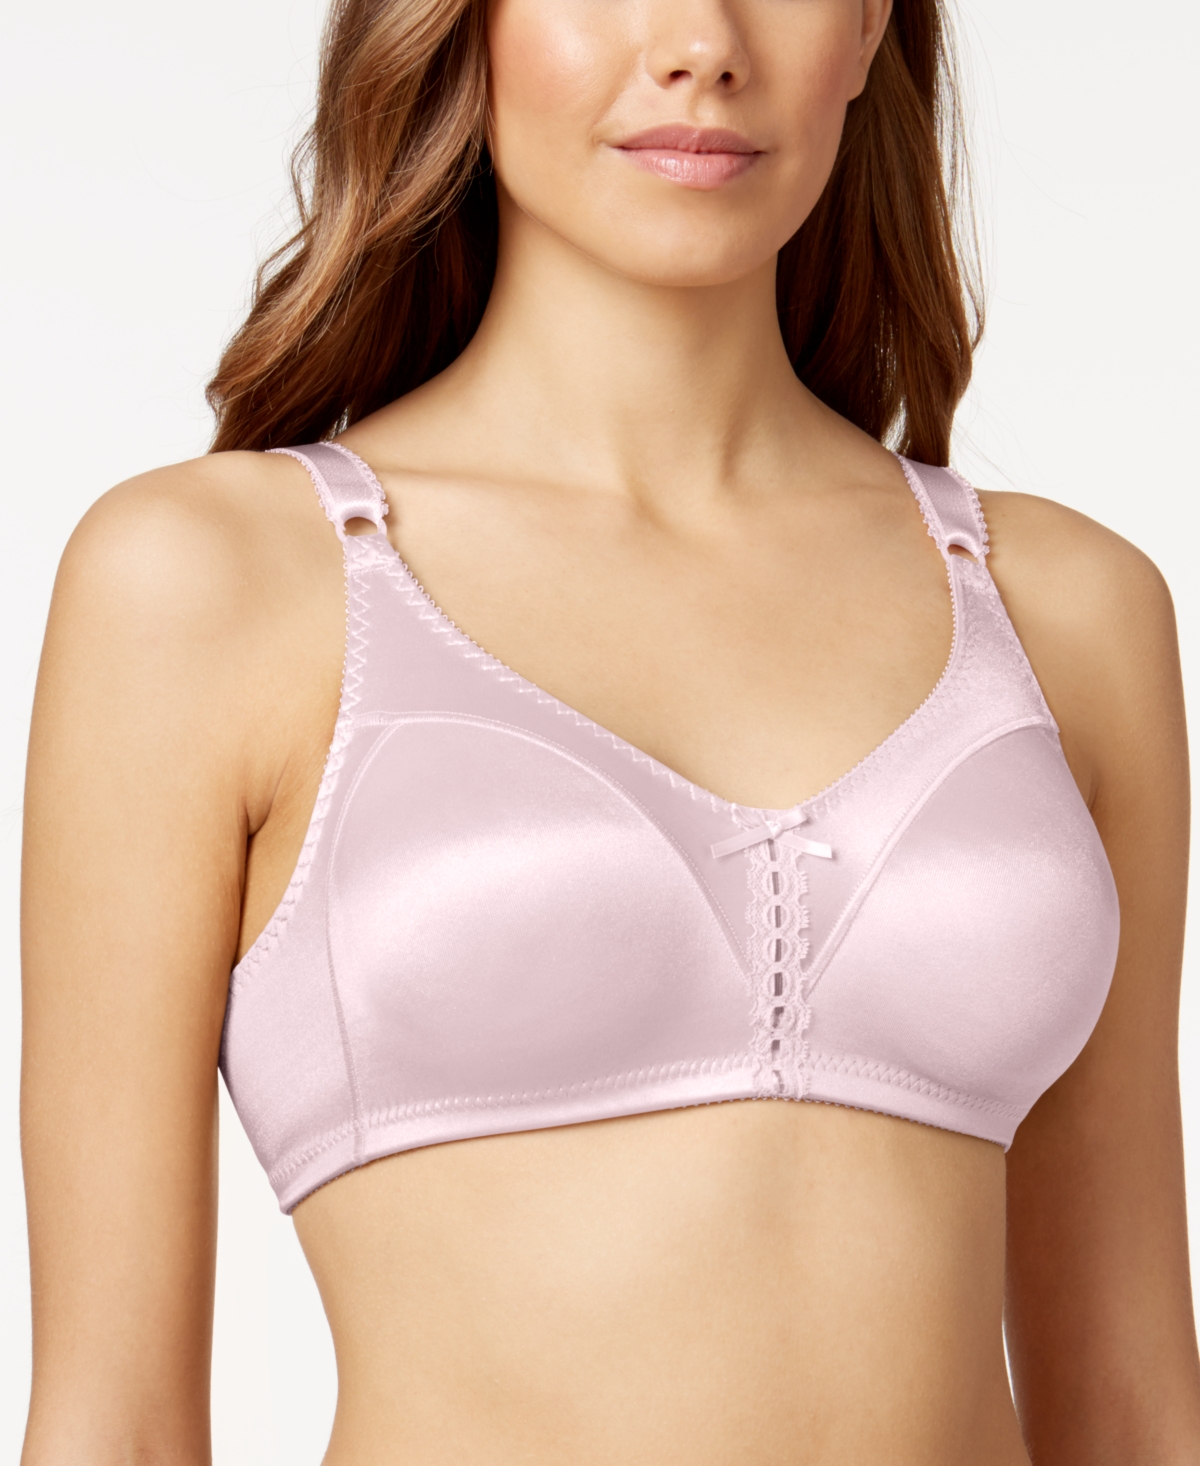 Double Support Tailored Wireless Lace Up Front Bra 3820 - Light Beige (Nude )